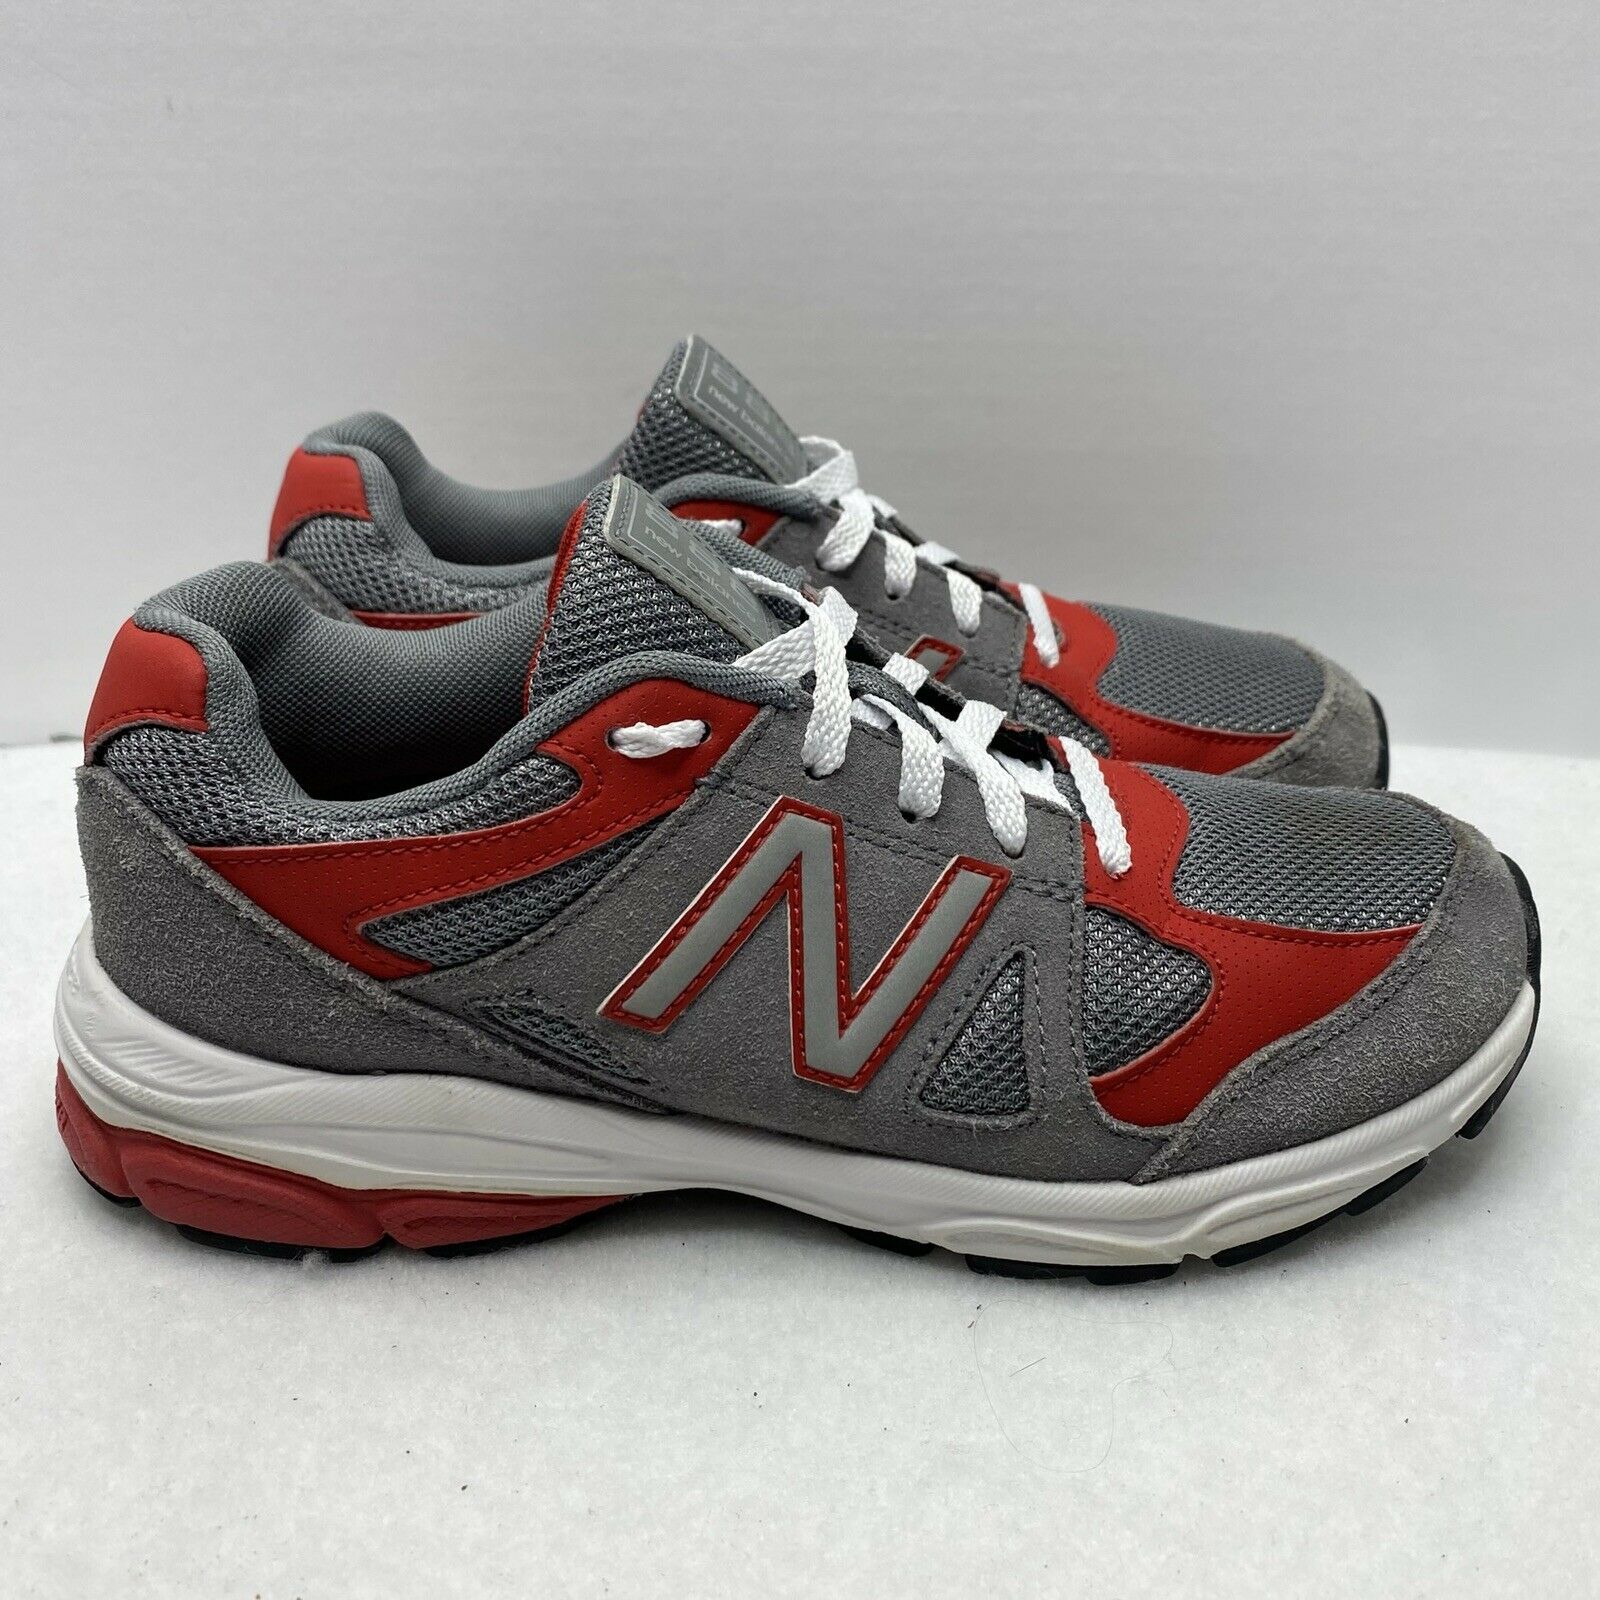 New Balance 888 Gray Red 4Y OR Women's 5.5 Running Walking Comfort Shoes